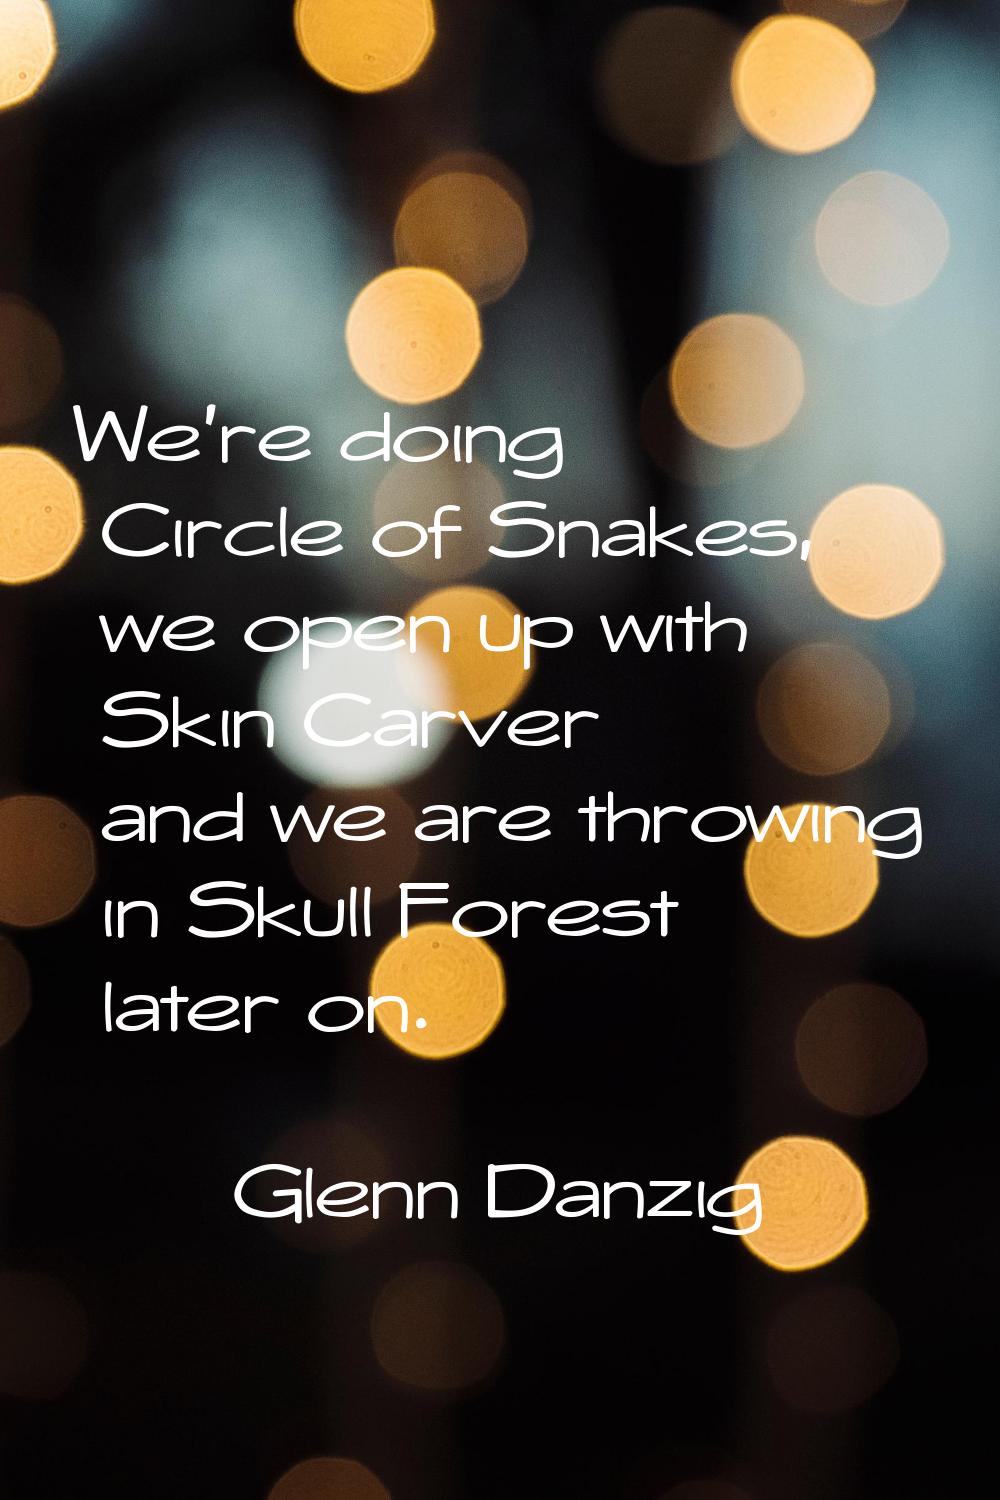 We're doing Circle of Snakes, we open up with Skin Carver and we are throwing in Skull Forest later